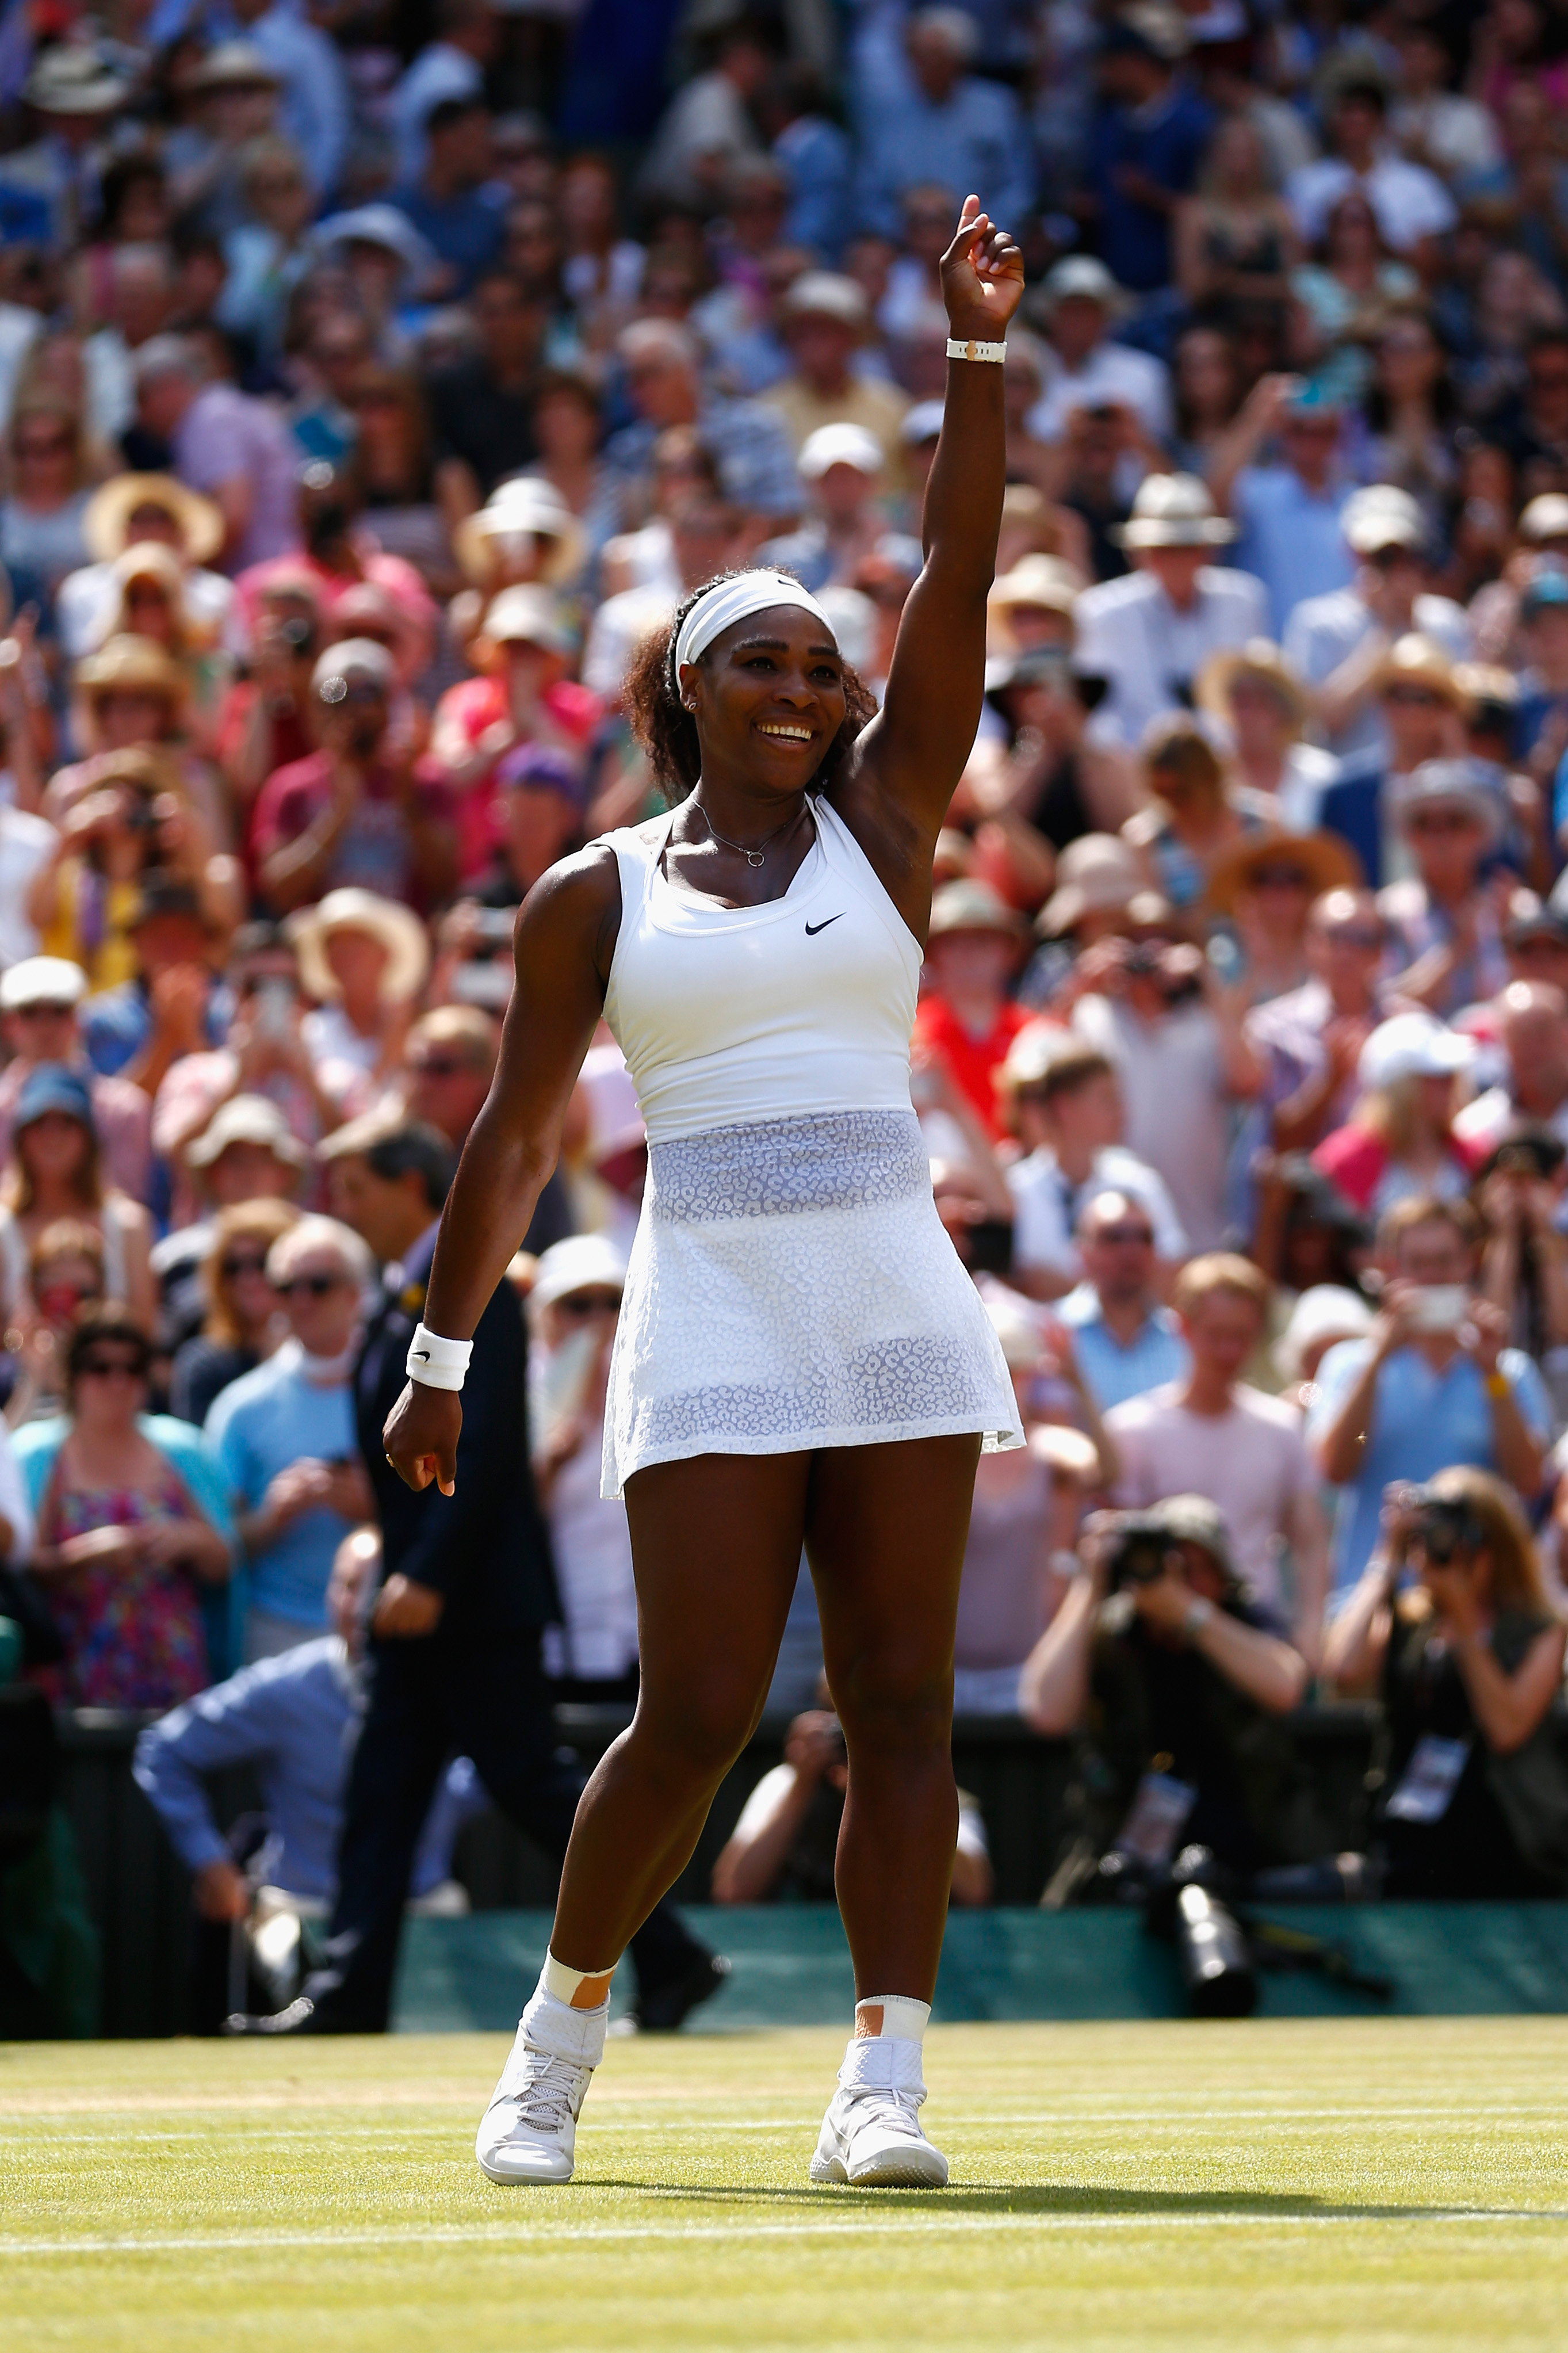 Serena Williams celebrates after winning the Final of the Ladies Singles against Garbine Muguruza of Spain during the day 12 of the Wimbledon Lawn Tennis Championships at the All England Lawn Tennis and Croquet Club in London, England on July 11, 2015. (Julian Finney—Getty Images)